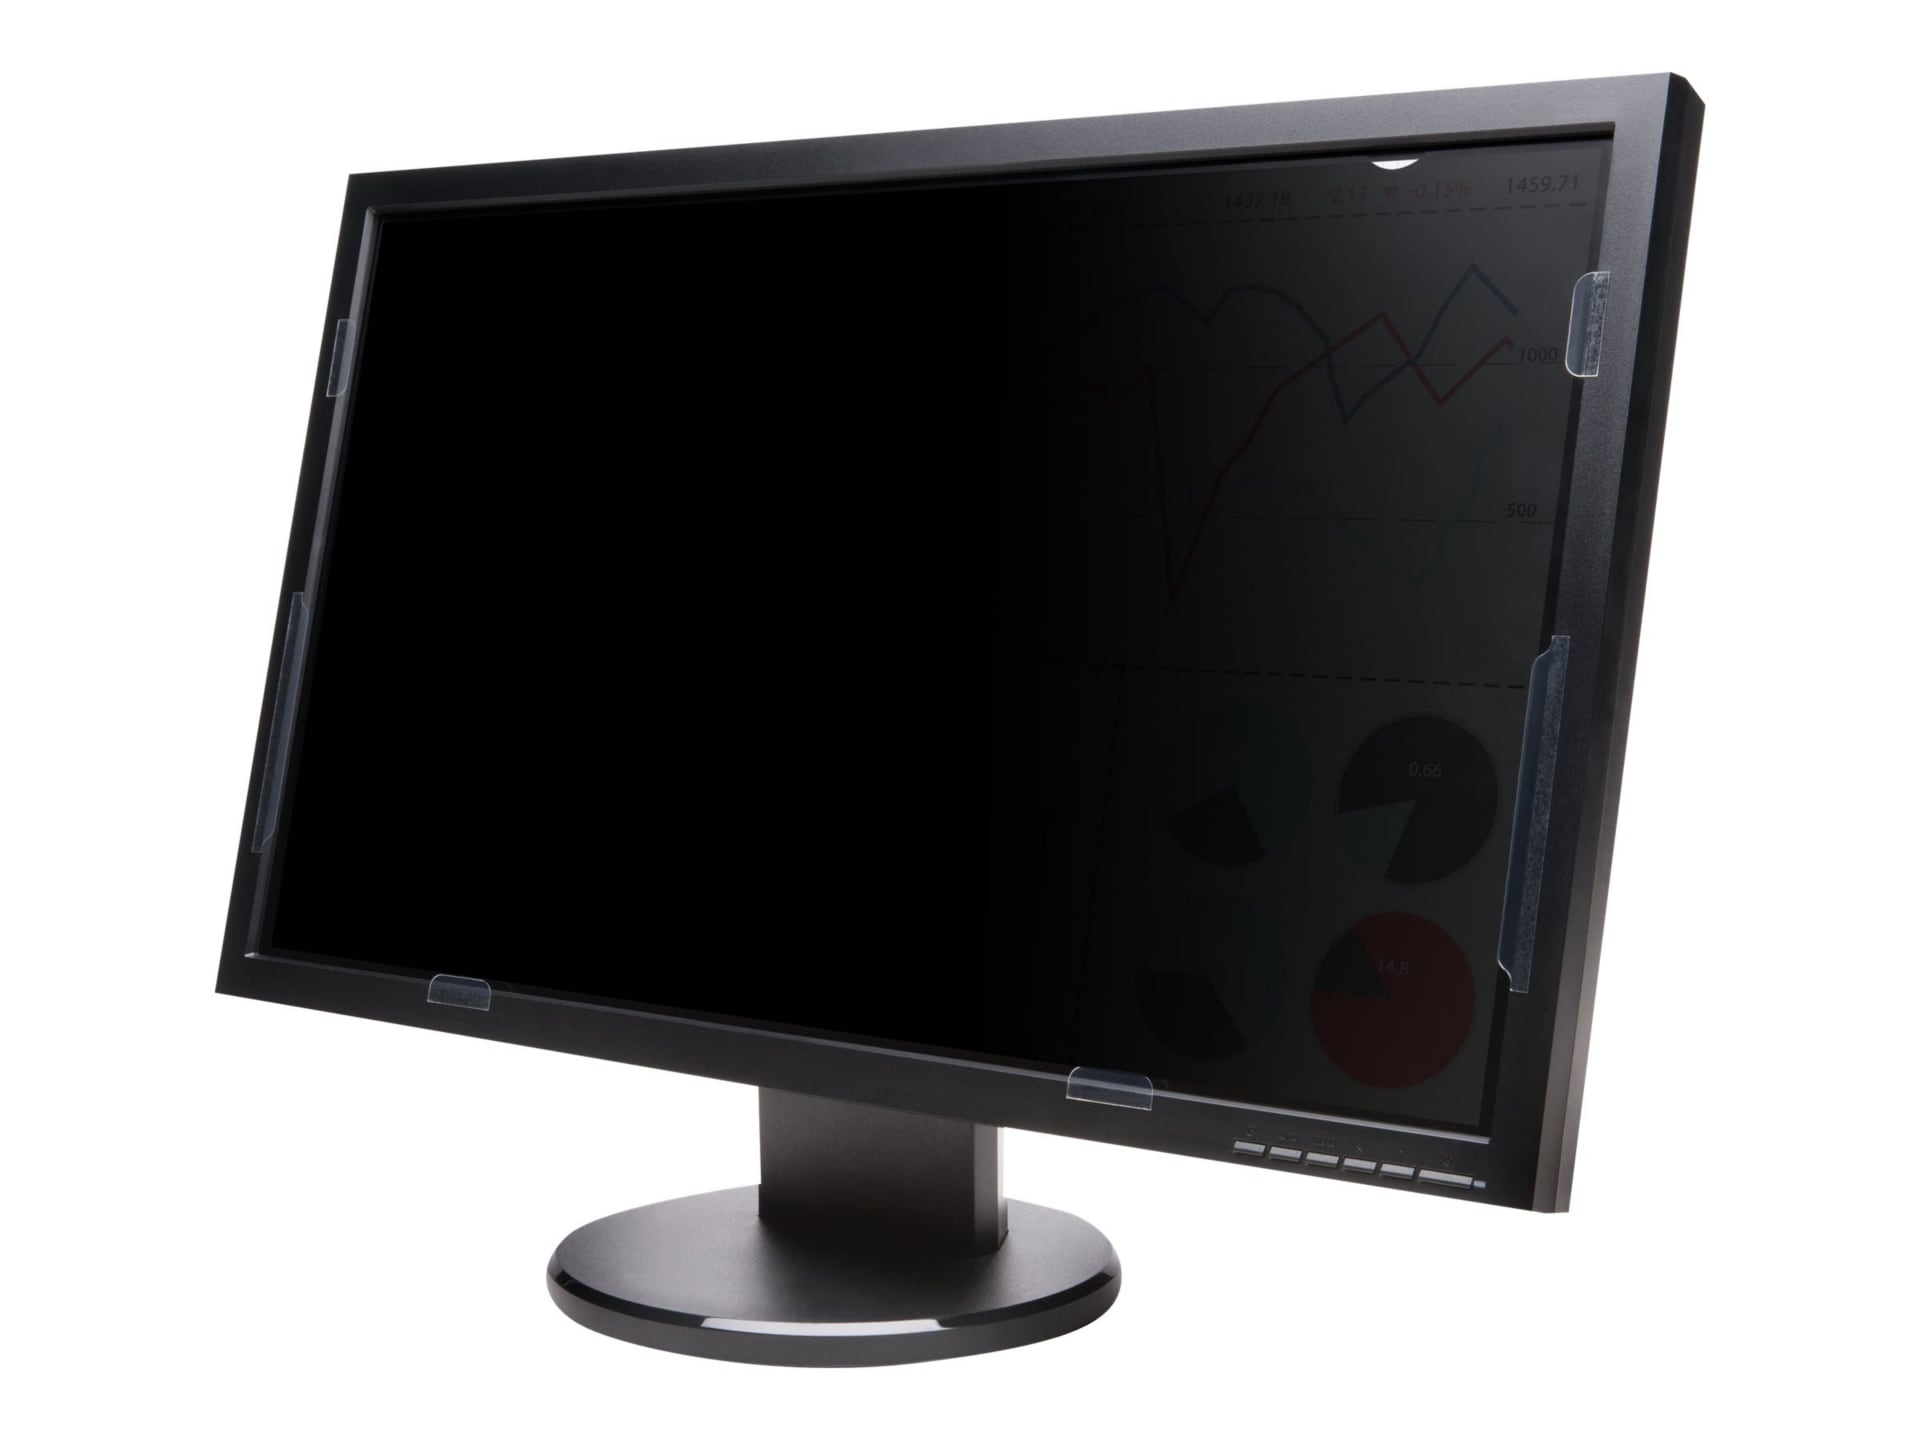 Kensington FP236W9 Privacy Screen for 23.6" Monitors - display privacy filt